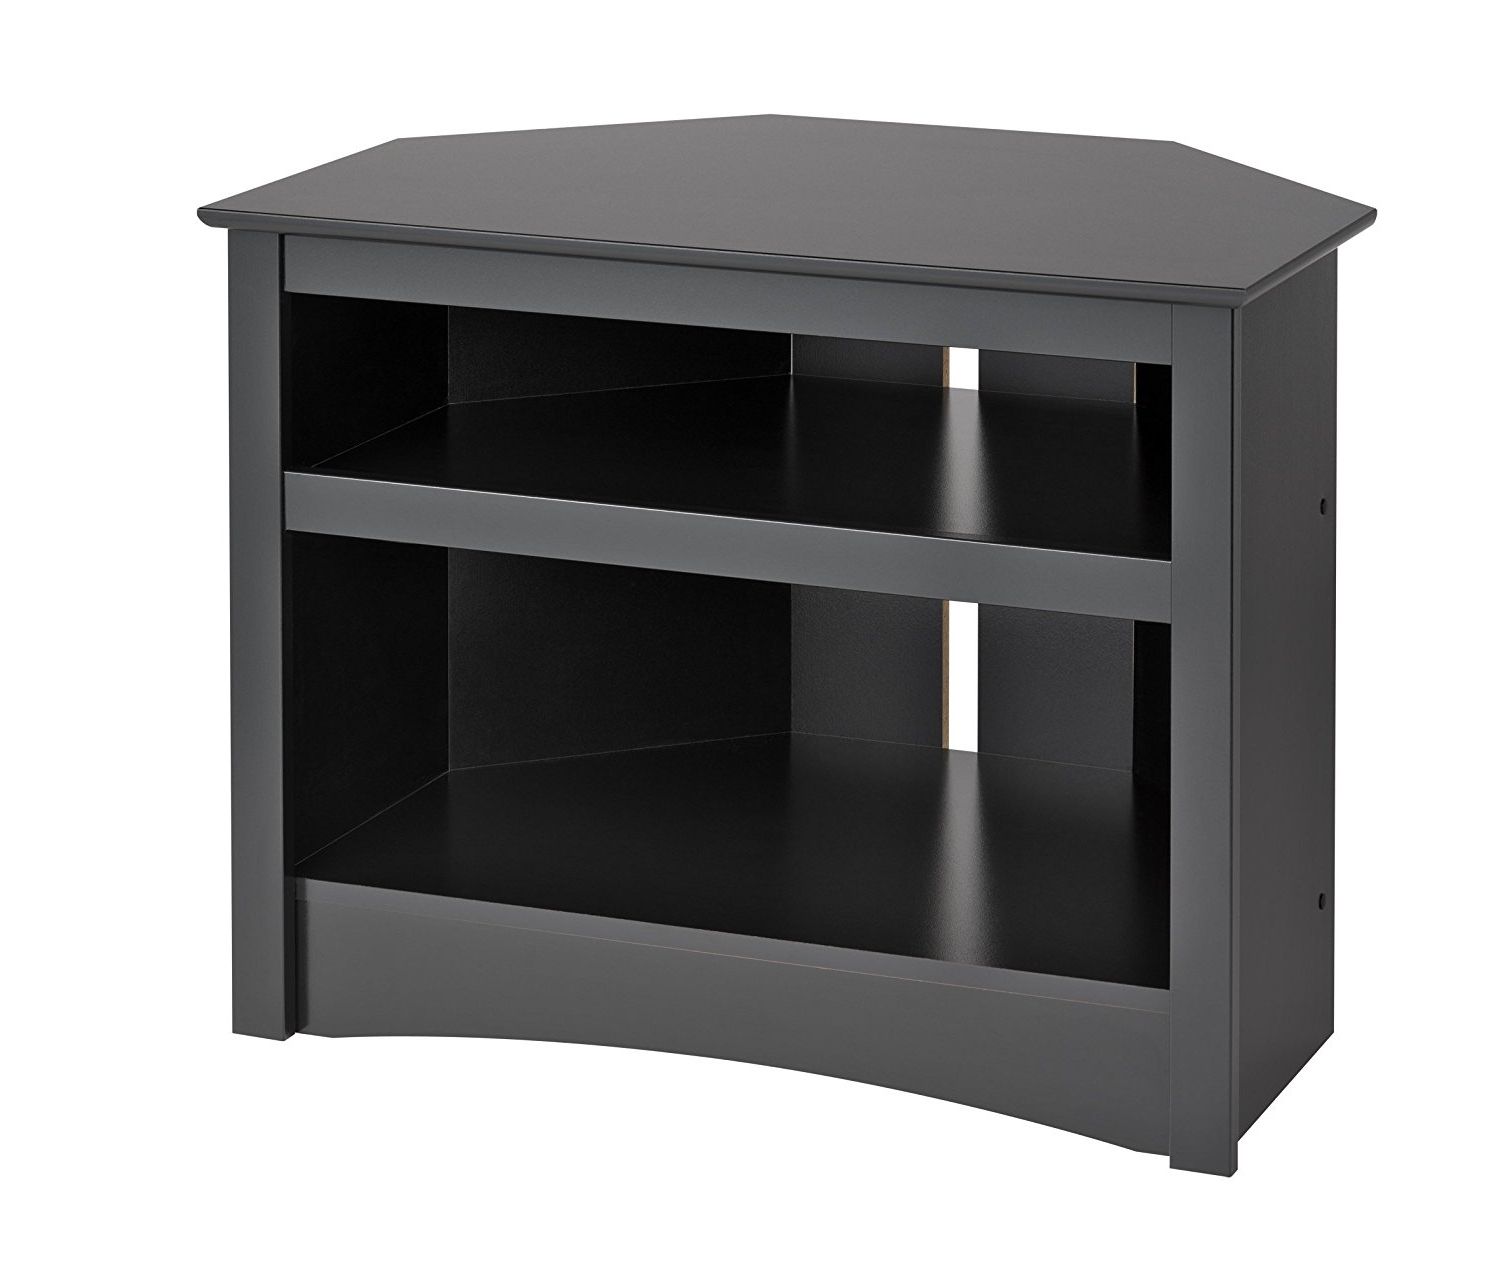 Make Your Bedroom Attractive With A Small Black Tv Stand – Furnish Ideas In Widely Used Small Corner Tv Stands (View 5 of 20)